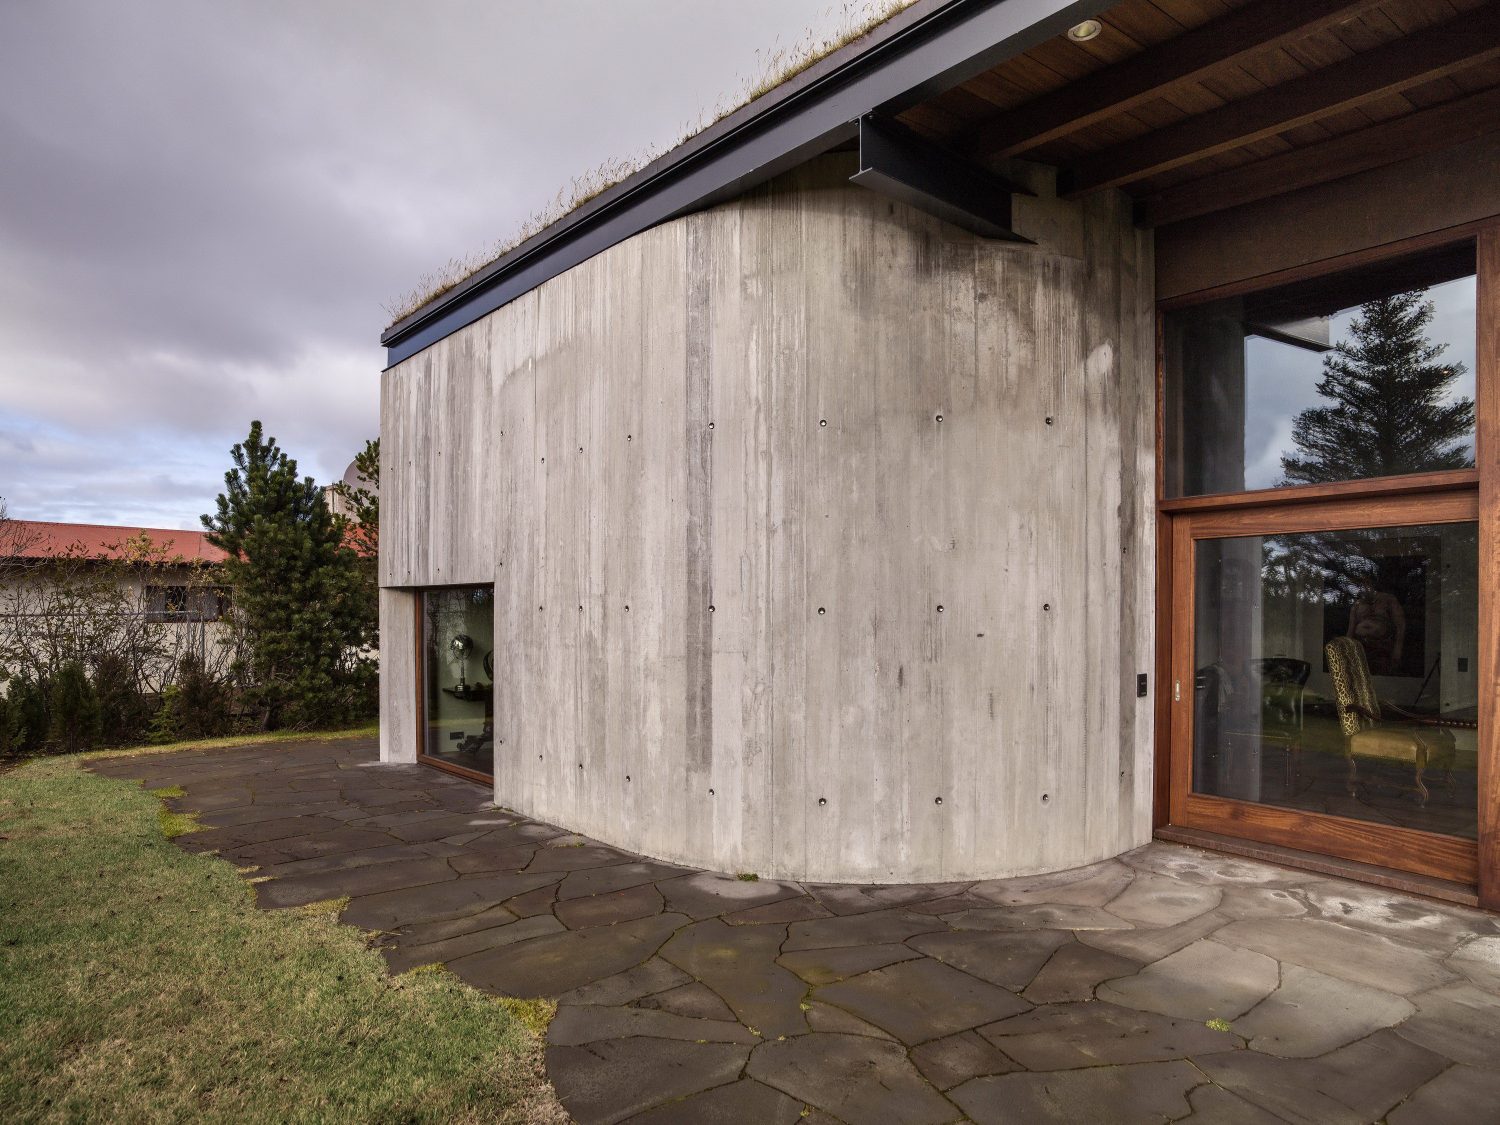 B14 – Icelandic Villa under a Series of Sharply Pitched Green Roofs